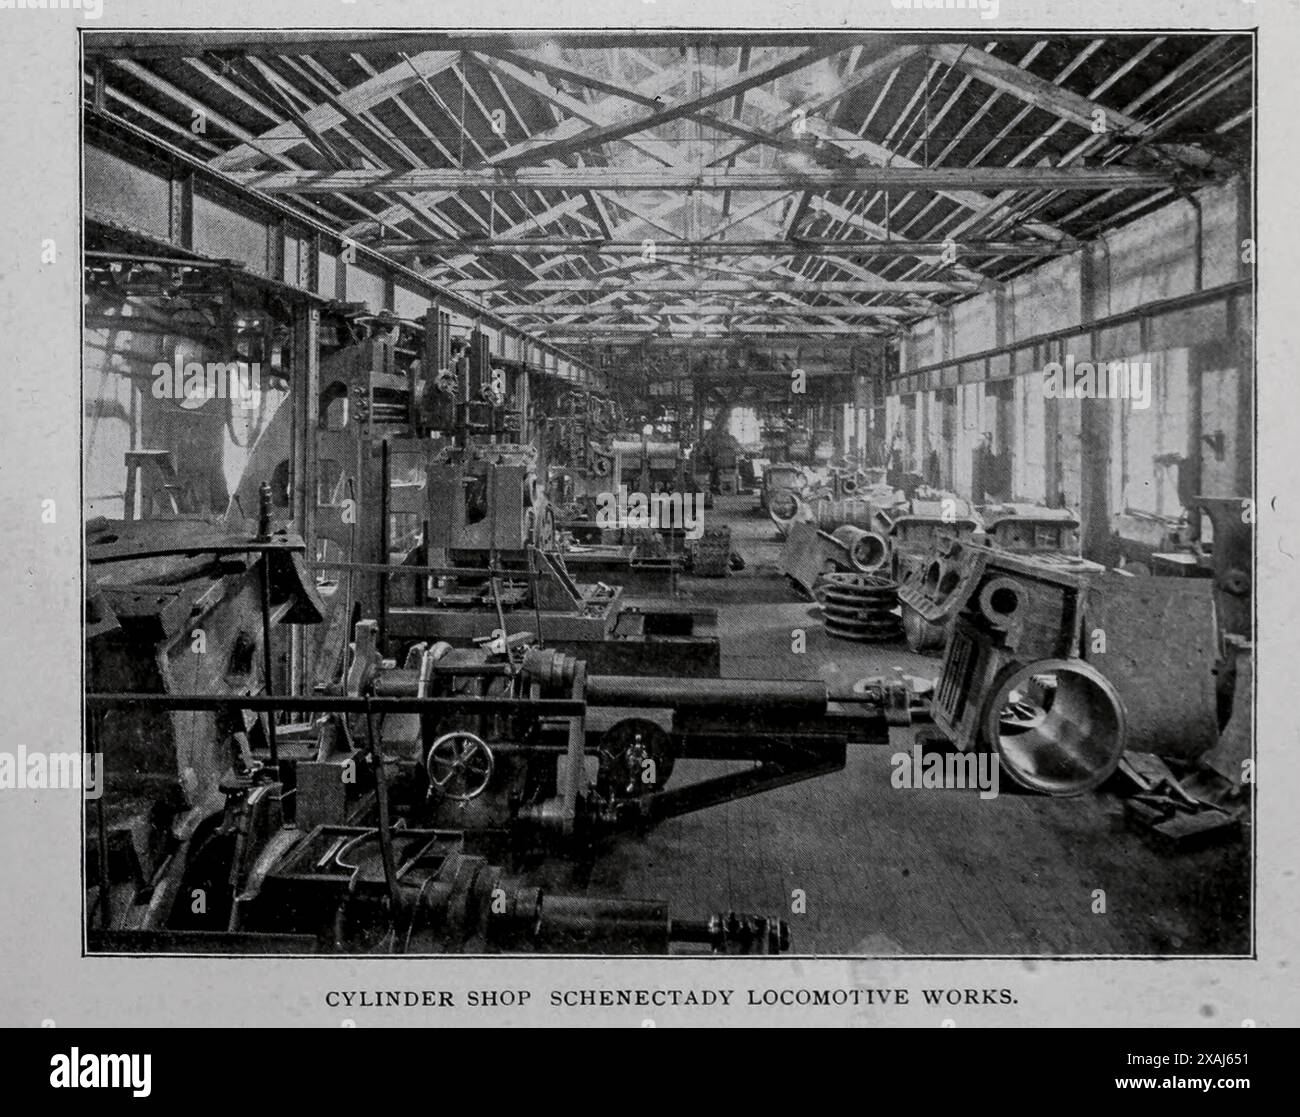 CYLINDER SHOP, SCHENECTADY LOCOMOTIVE WORKS. from the Article ENGLISH AND AMERICAN LOCOMOTIVE BUILDING Part II By Charles Rous-Marten. from The Engineering Magazine Devoted to Industrial Progress Volume XVII 1899 The Engineering Magazine Co Stock Photo